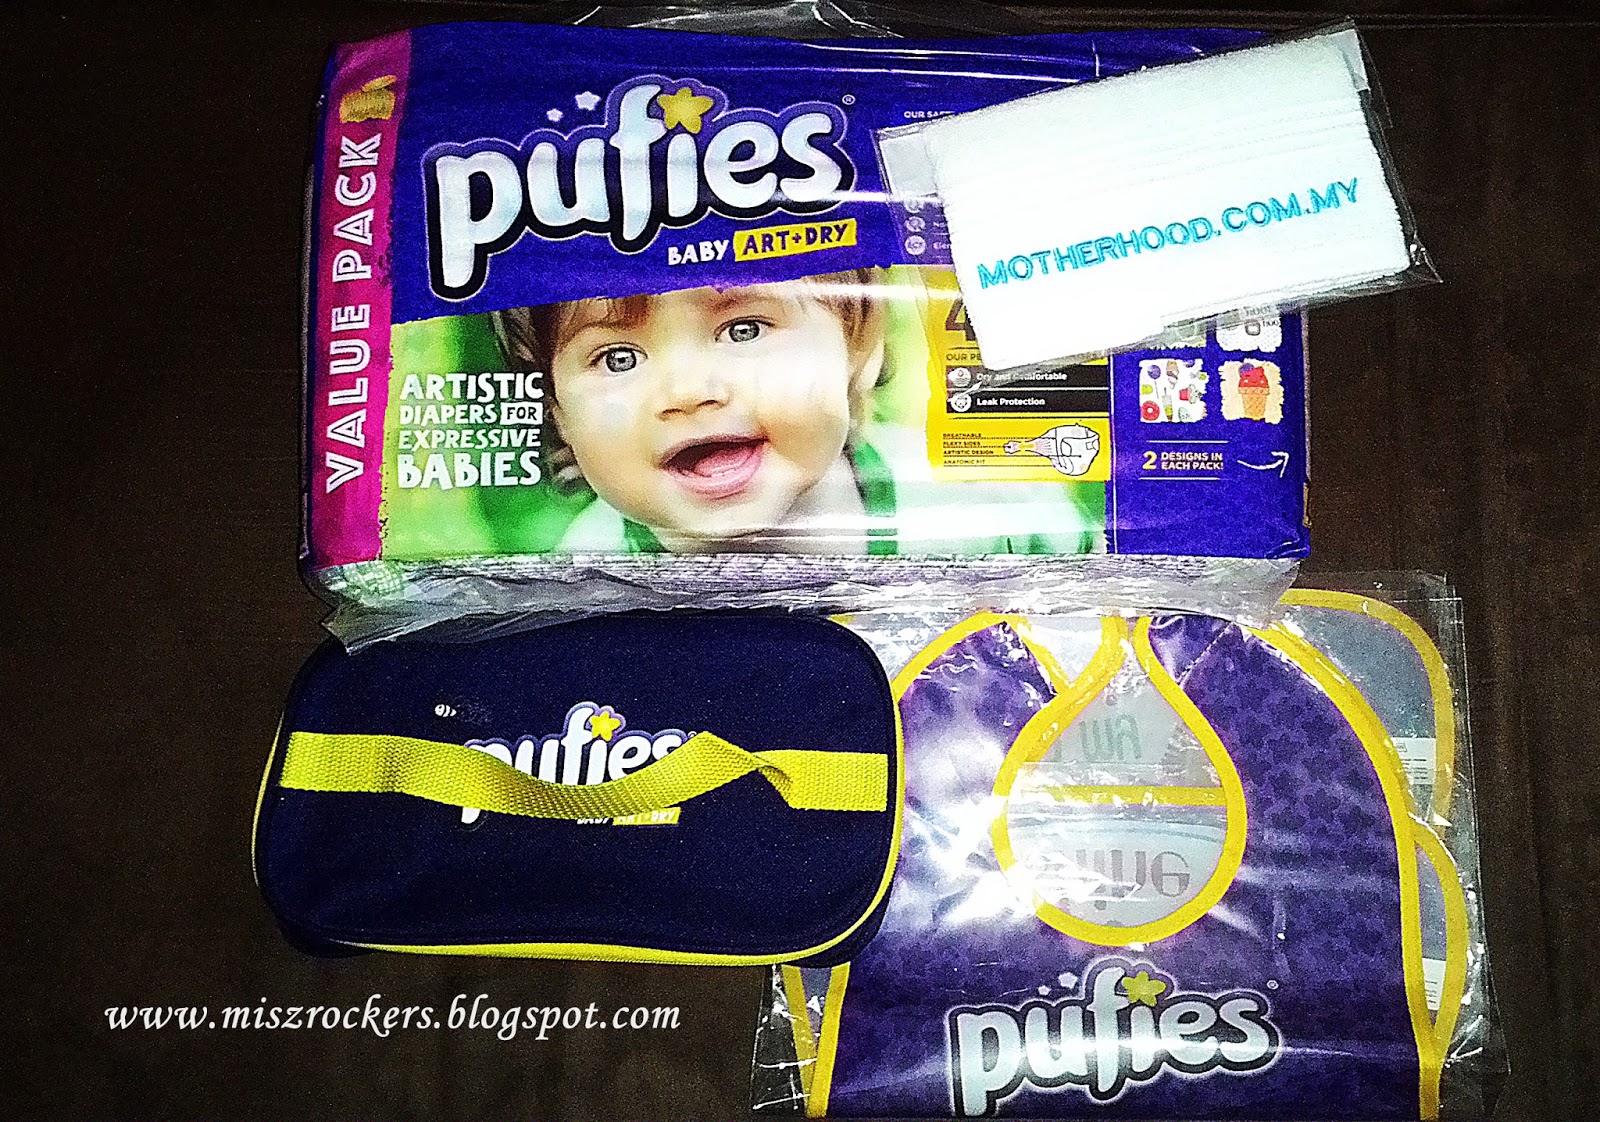 PAMPERS PUFIES BABY ART + DRY